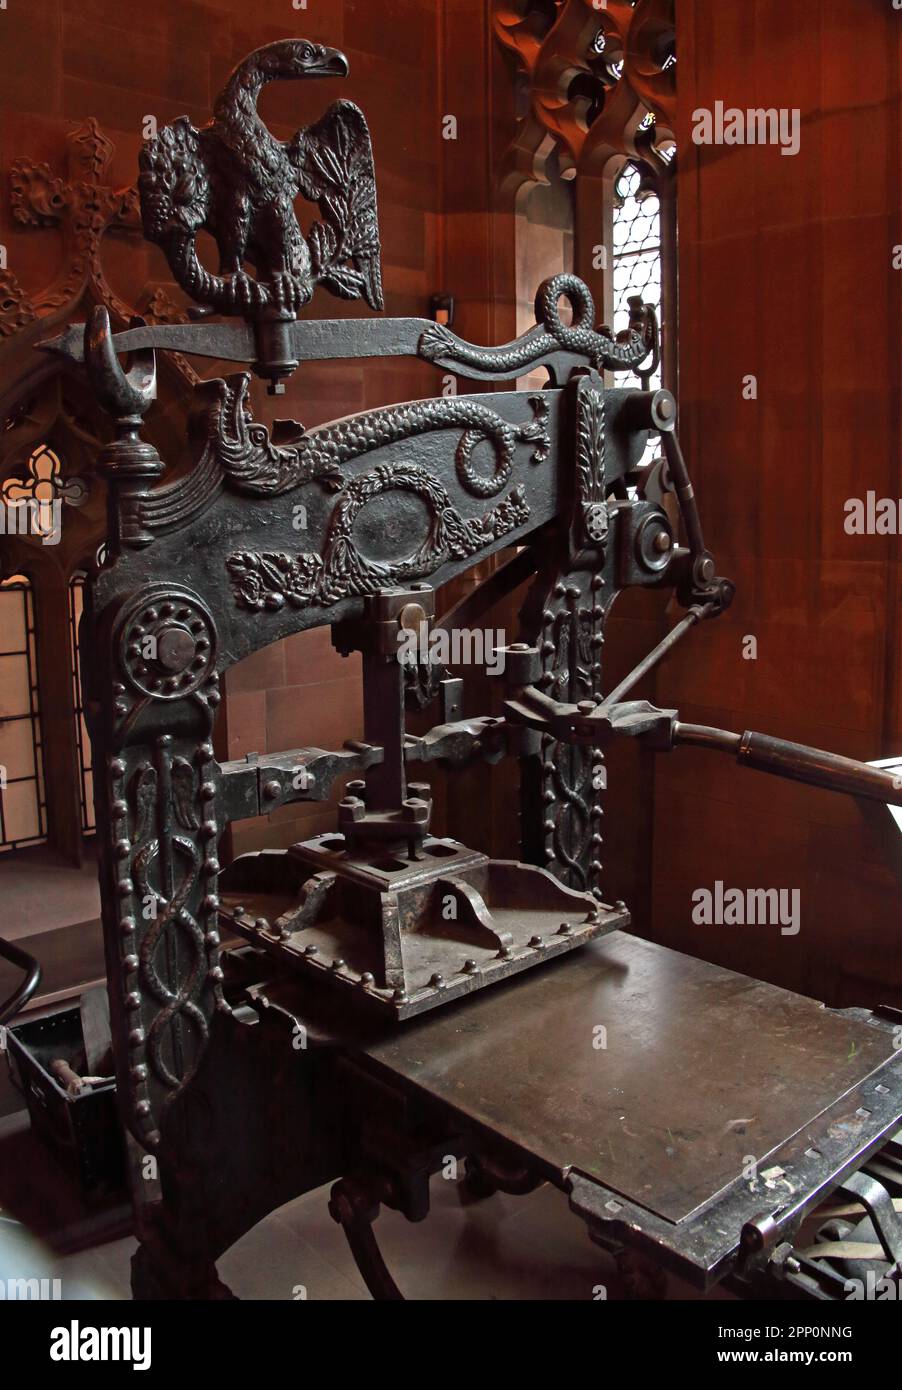 Historic Columbian Gutenberg printing press, John Rylands Research Institute and Library, 150 Deansgate, Manchester, England, UK,  M3 3EH Stock Photo